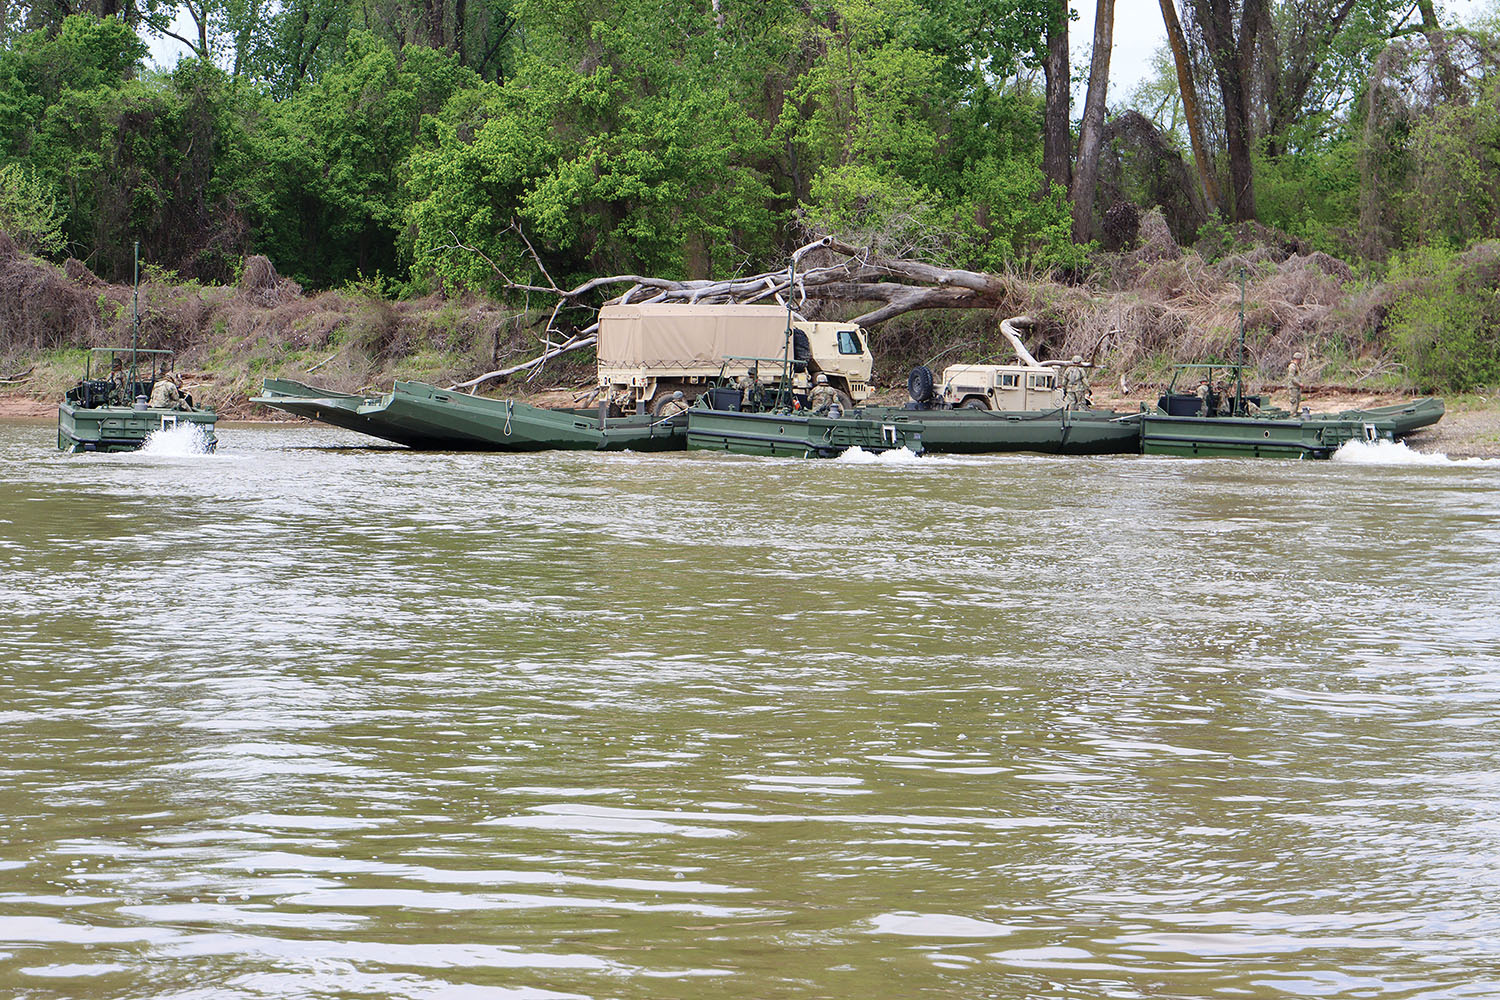 Army units perform a river assault and bridge-building exercise on the Arkansas River April 12. (Photo by Jay Woods, Rock Island Engineer District)